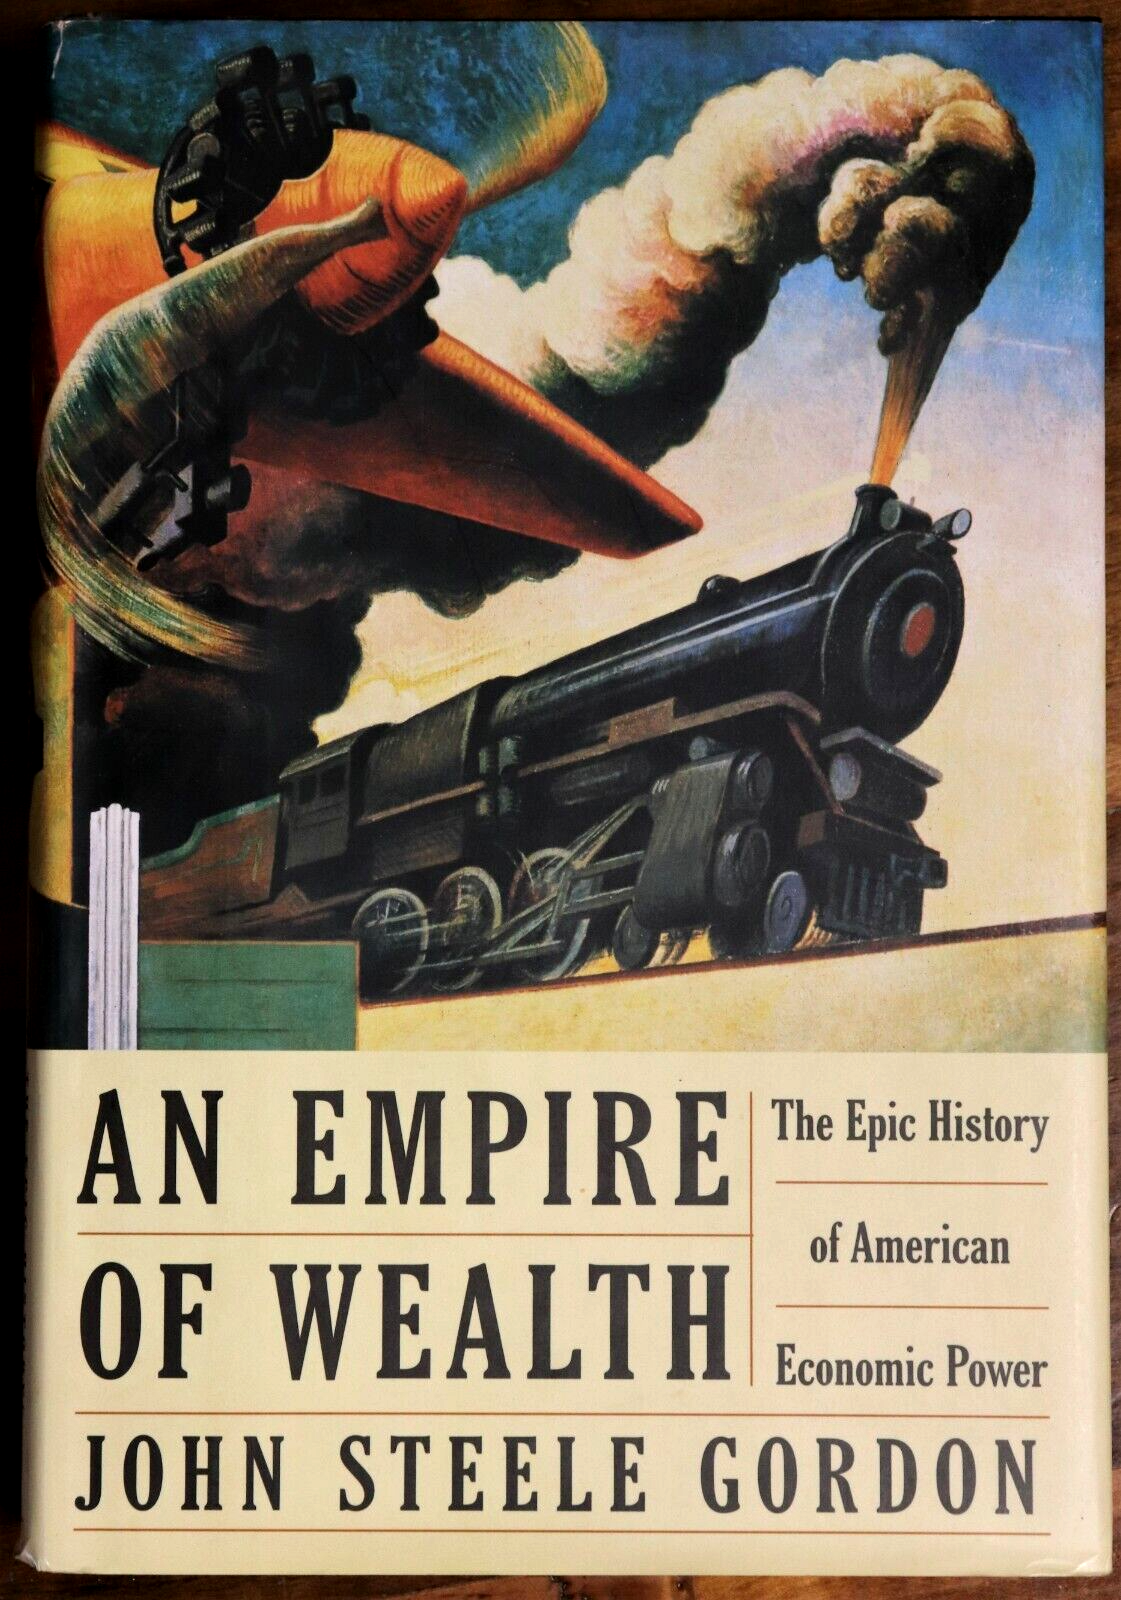 An Empire Of Wealth by JS Gordon - 2004 - 1st Ed. American Economic History Book